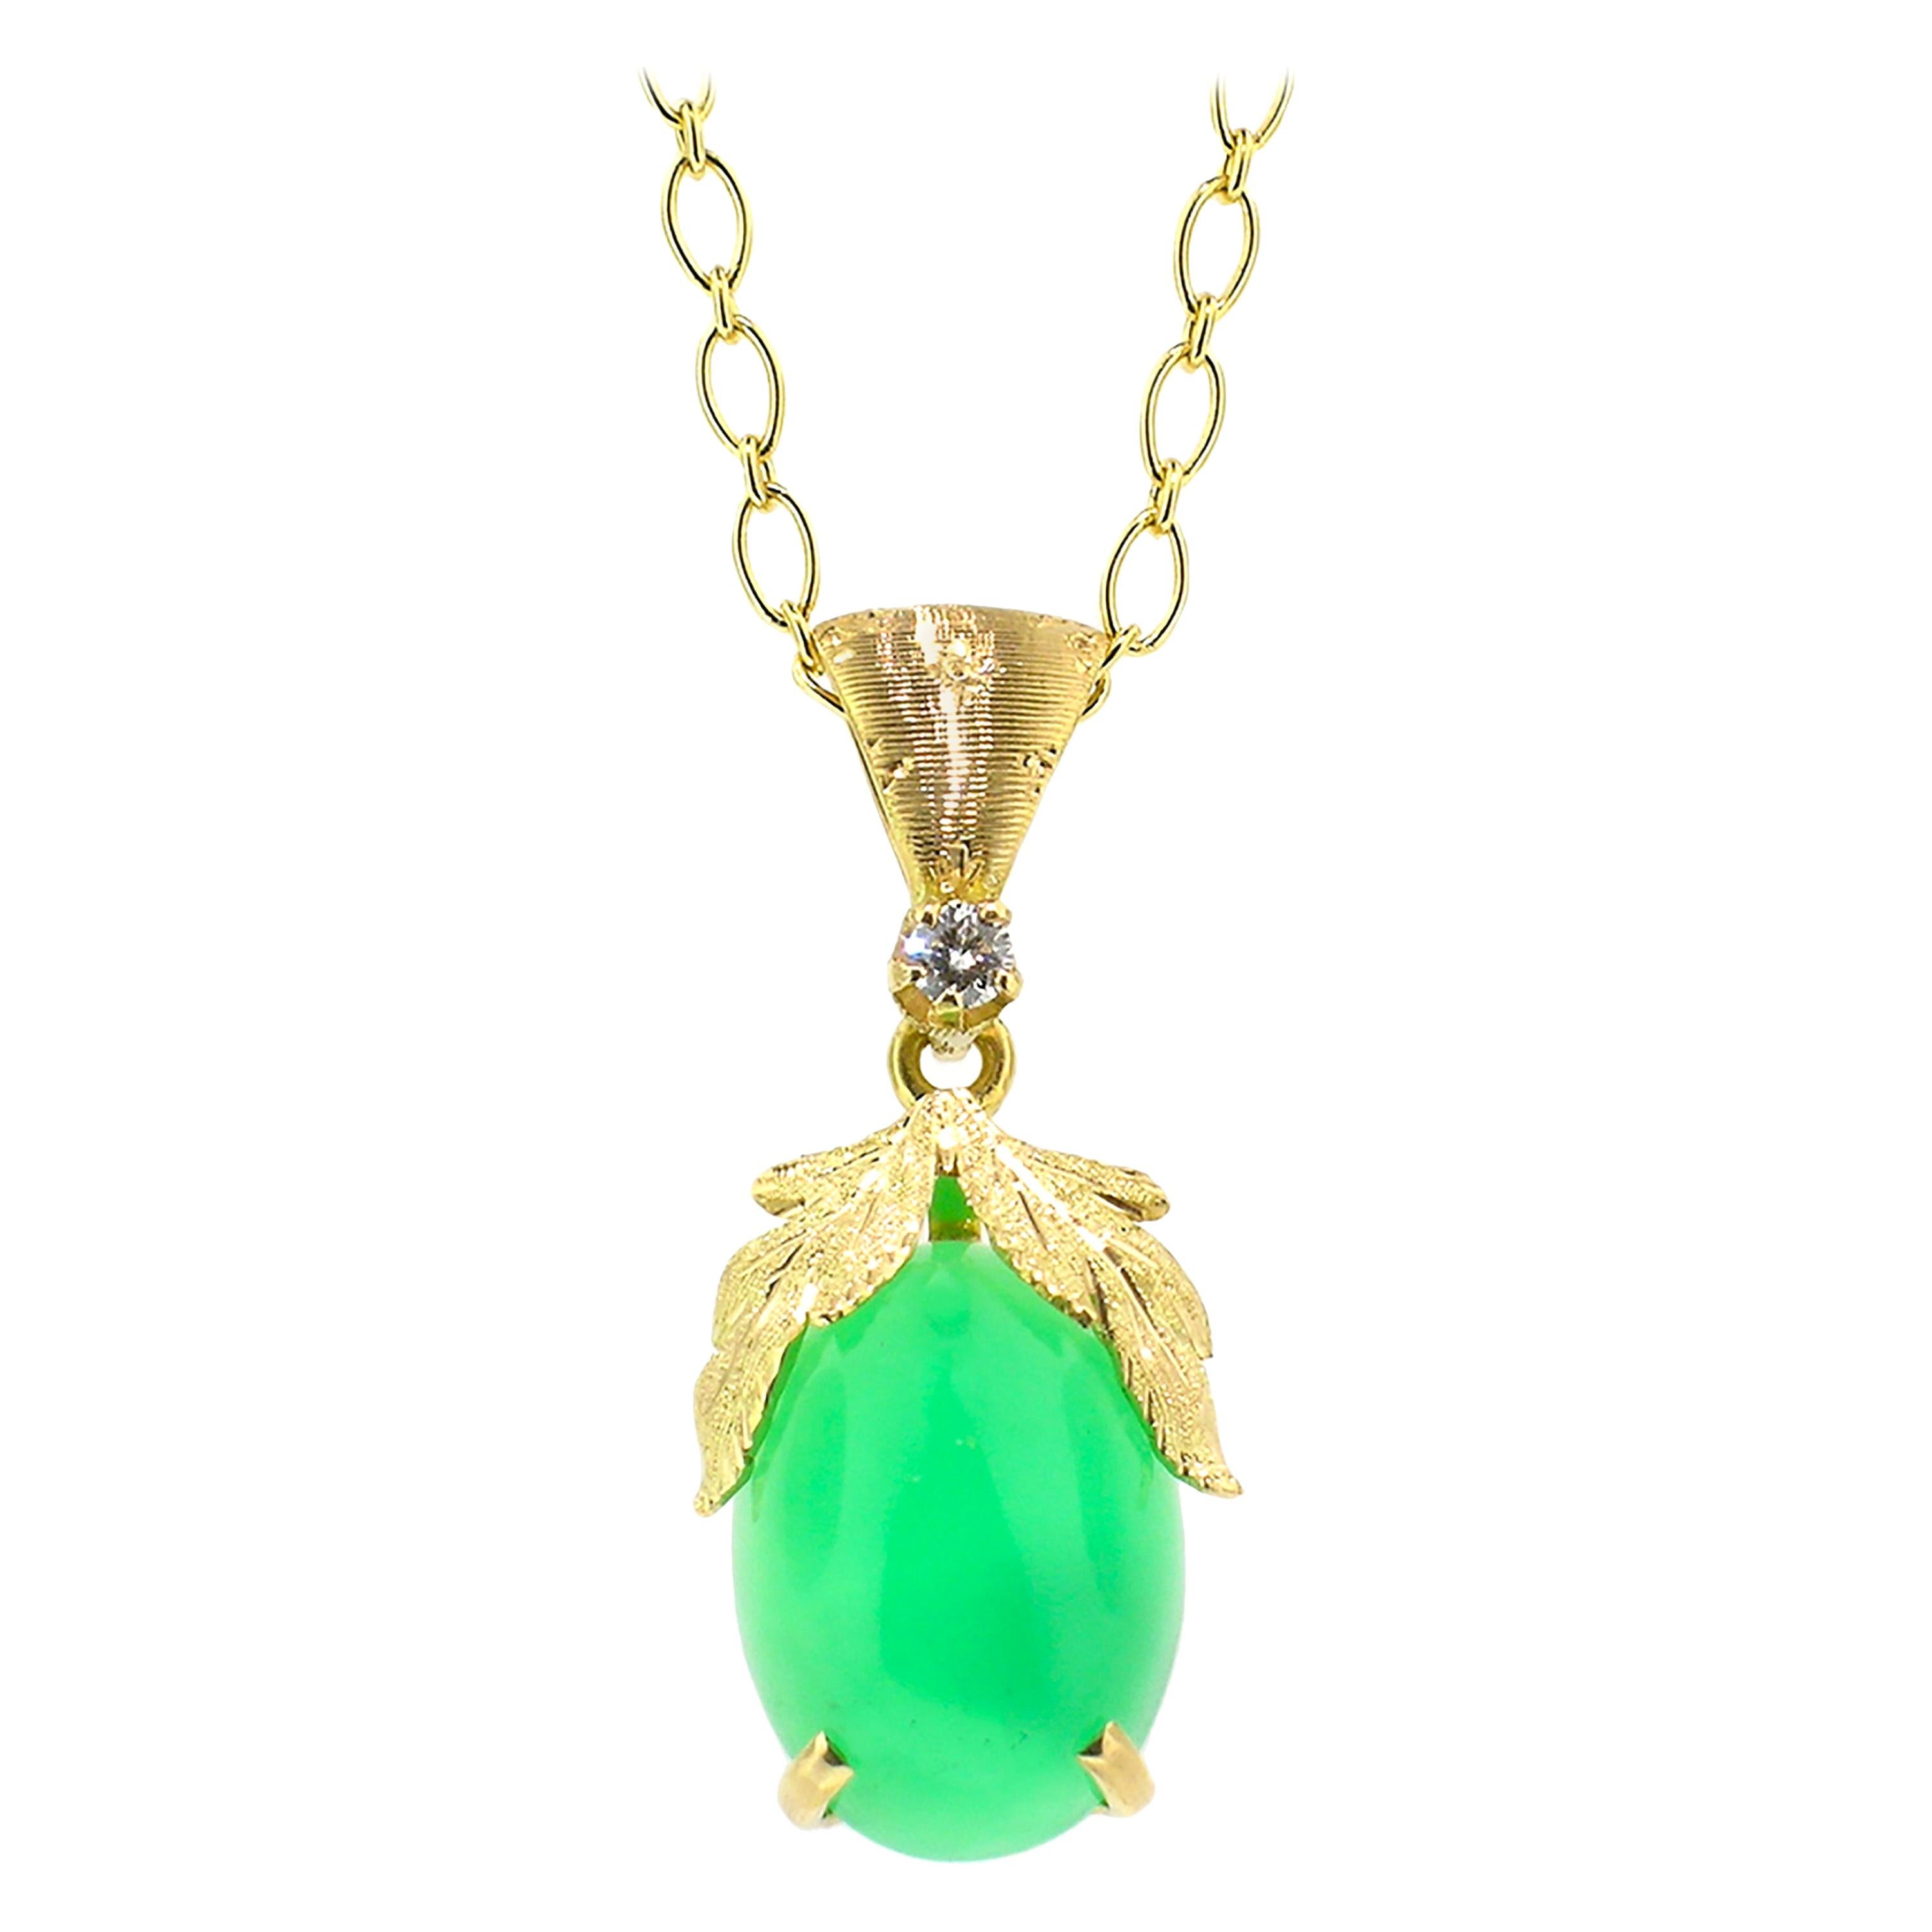 6.98ct Chrysoprase and 18kt Necklace, Made in Italy by Cynthia Scott Jewelry For Sale